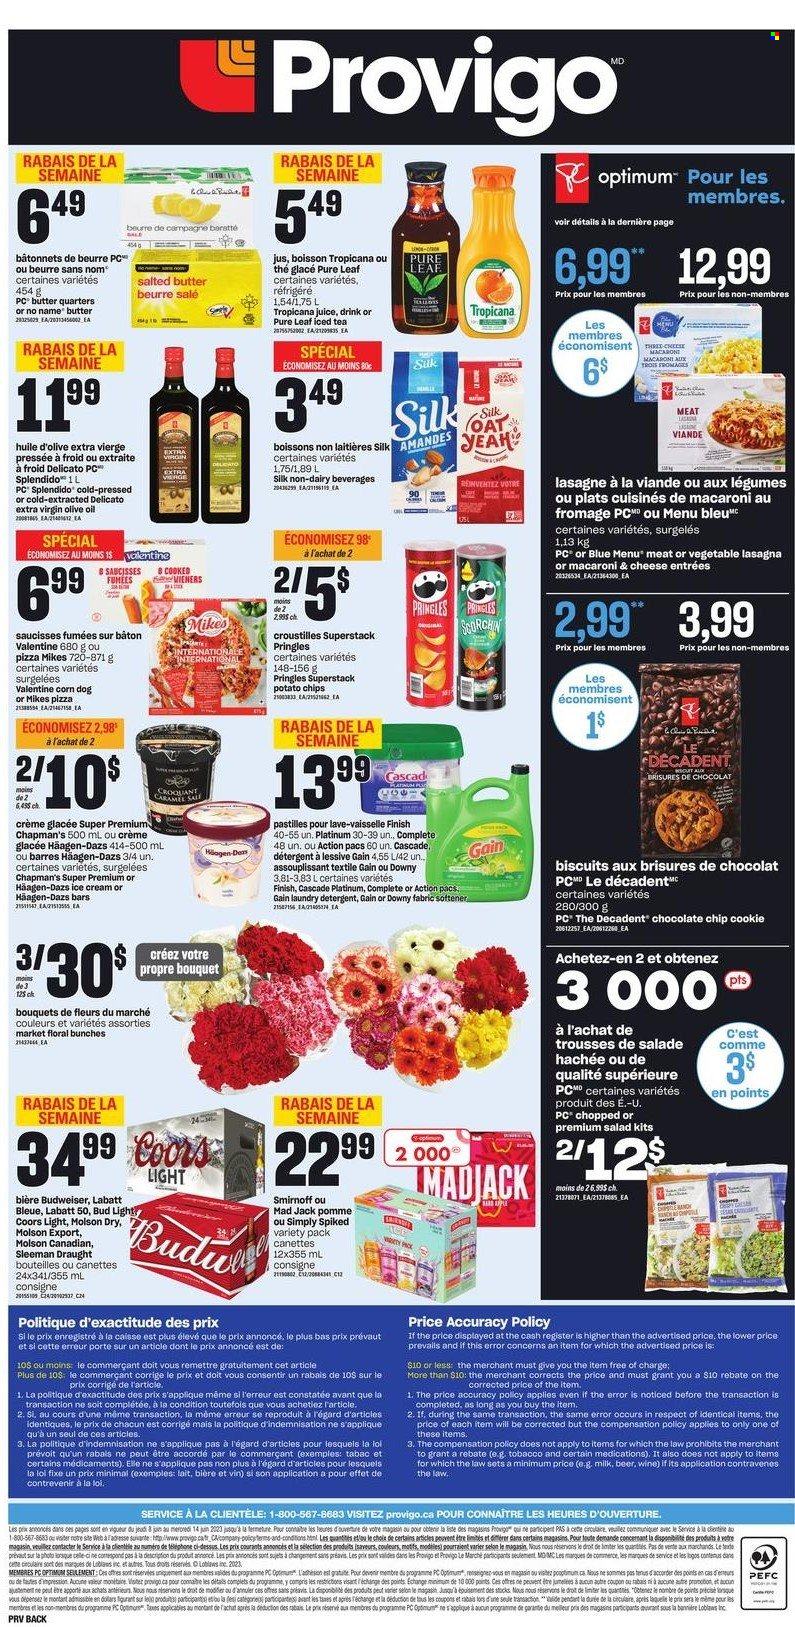 thumbnail - Provigo Flyer - June 08, 2023 - June 14, 2023 - Sales products - Ace, macaroons, corn, salad, No Name, macaroni & cheese, pizza, lasagna meal, milk, Silk, salted butter, ice cream, Häagen-Dazs, chocolate chips, biscuit, pastilles, potato chips, Pringles, chips, salty snack, caramel, extra virgin olive oil, olive oil, oil, lemonade, juice, ice tea, Pure Leaf, wine, alcohol, Smirnoff, Bud Light, detergent, Gain, fabric softener, laundry detergent, Cascade, Downy Laundry, Optimum, Budweiser, Coors. Page 13.